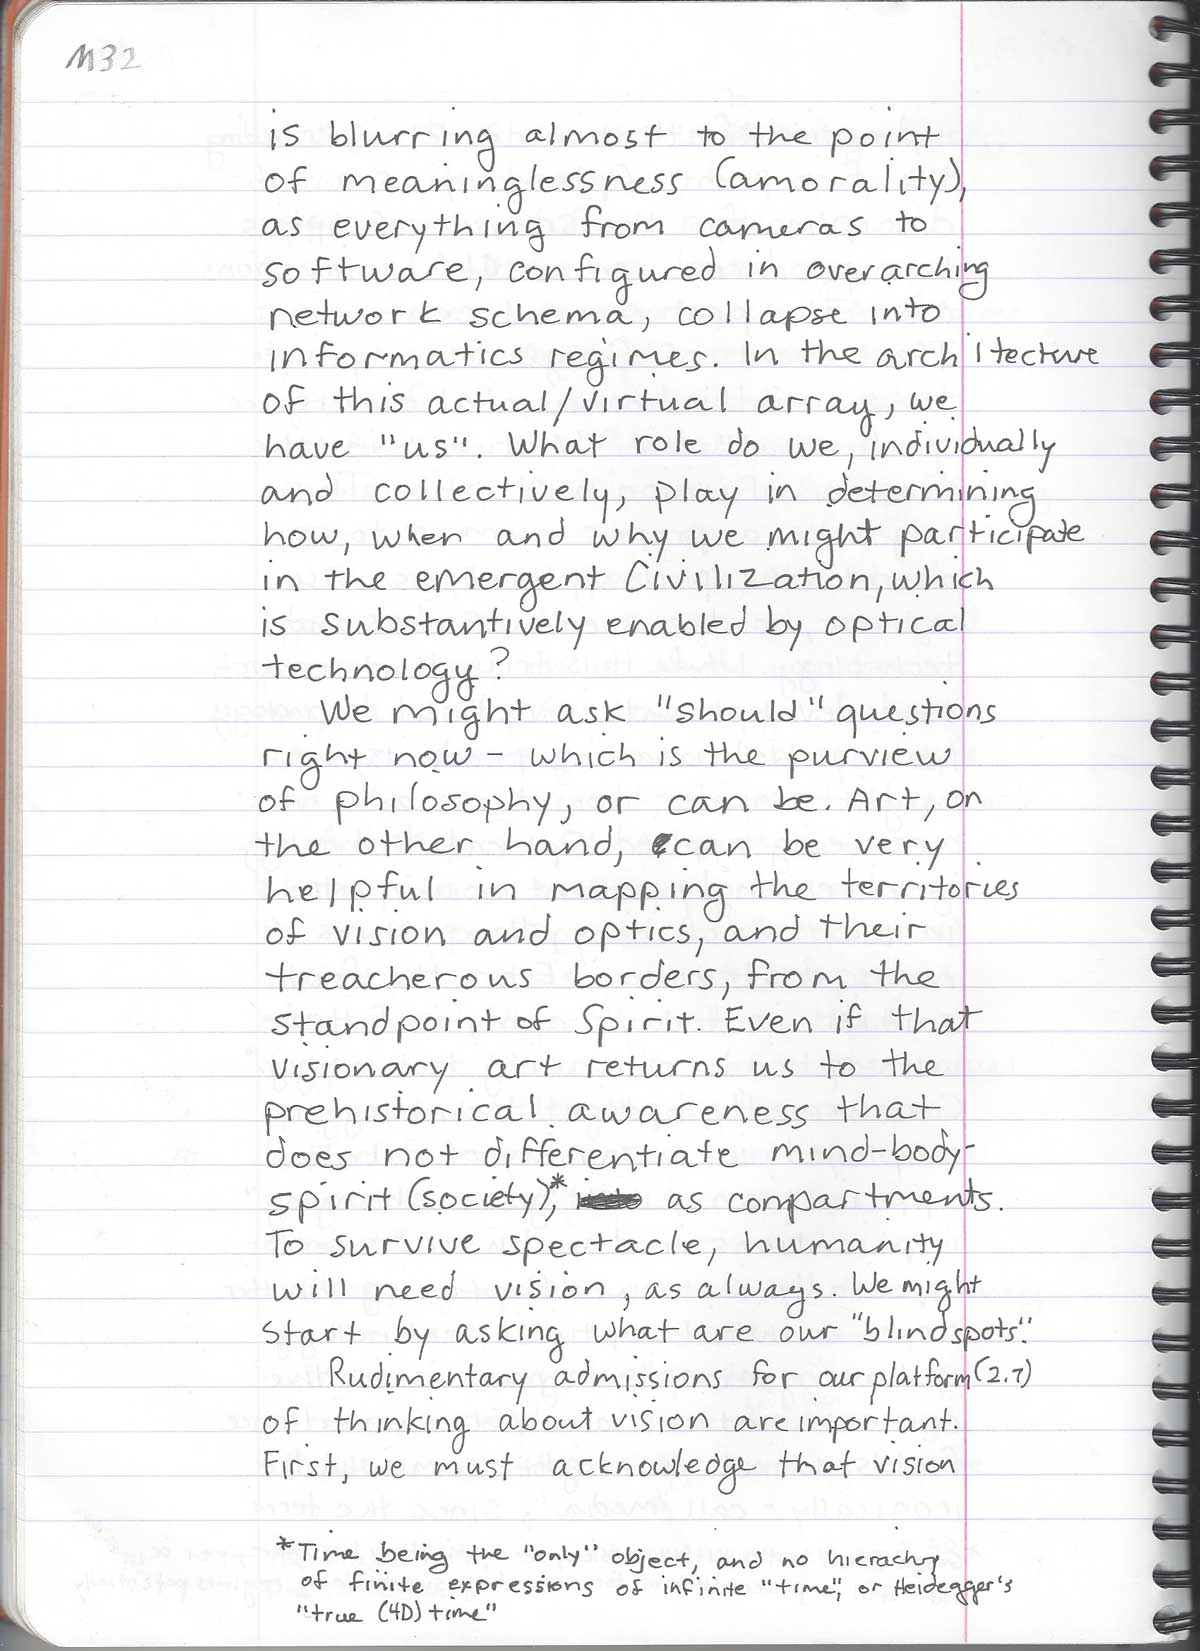 Link to scanned notebook page